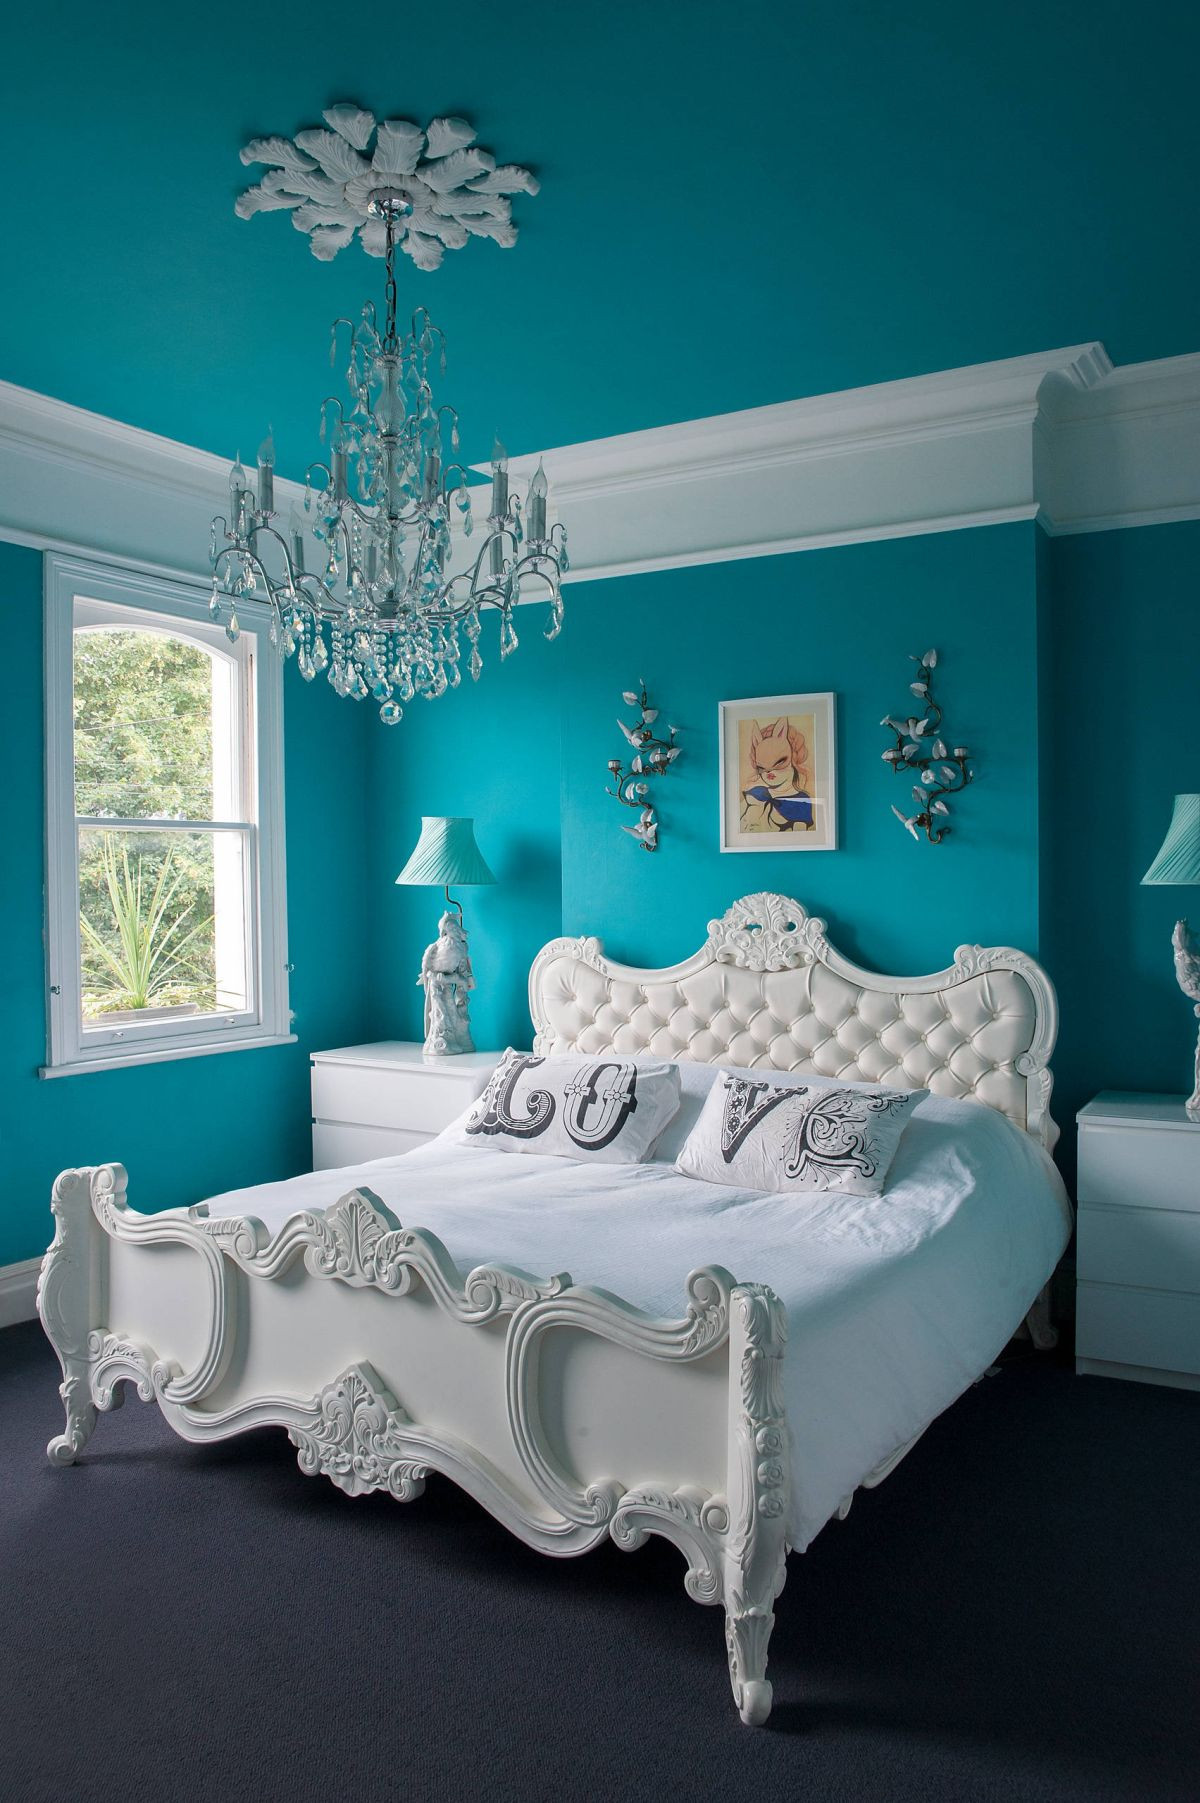 Best Bedroom Wall Colors
 The Four Best Paint Colors For Bedrooms